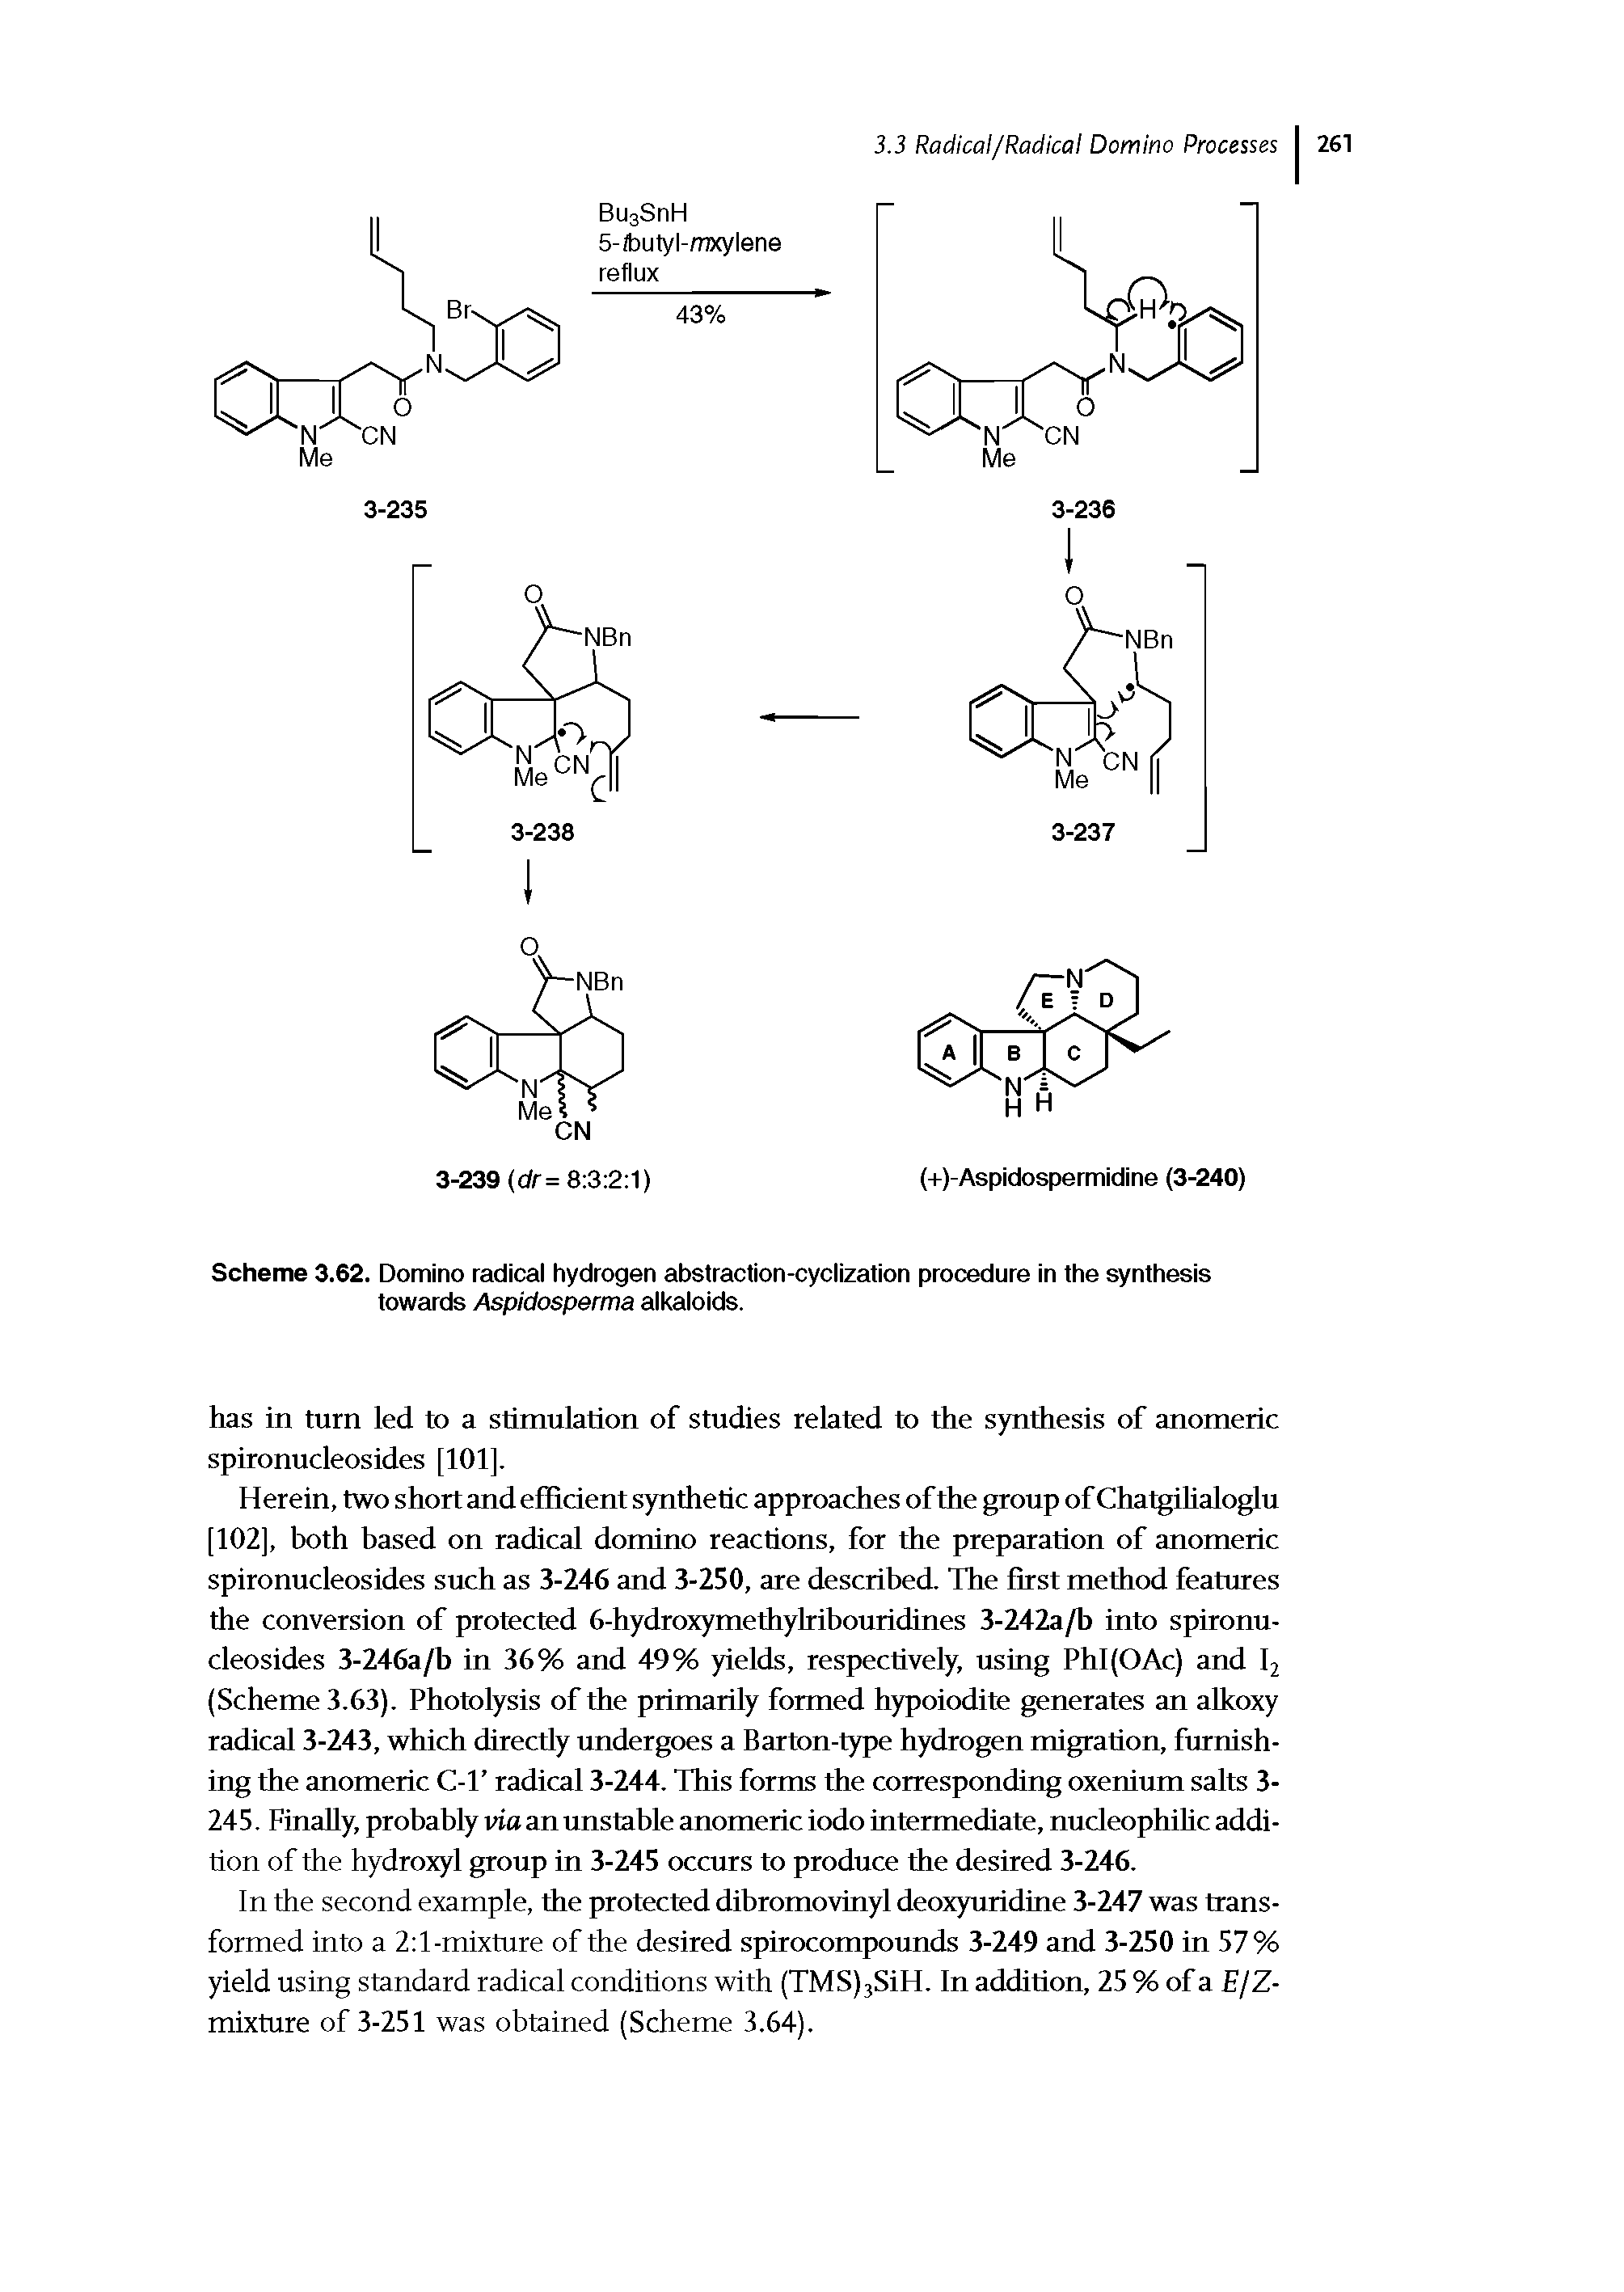 Scheme 3.62. Domino radical hydrogen abstraction-cyclization procedure in the synthesis towards Aspidosperma alkaloids.